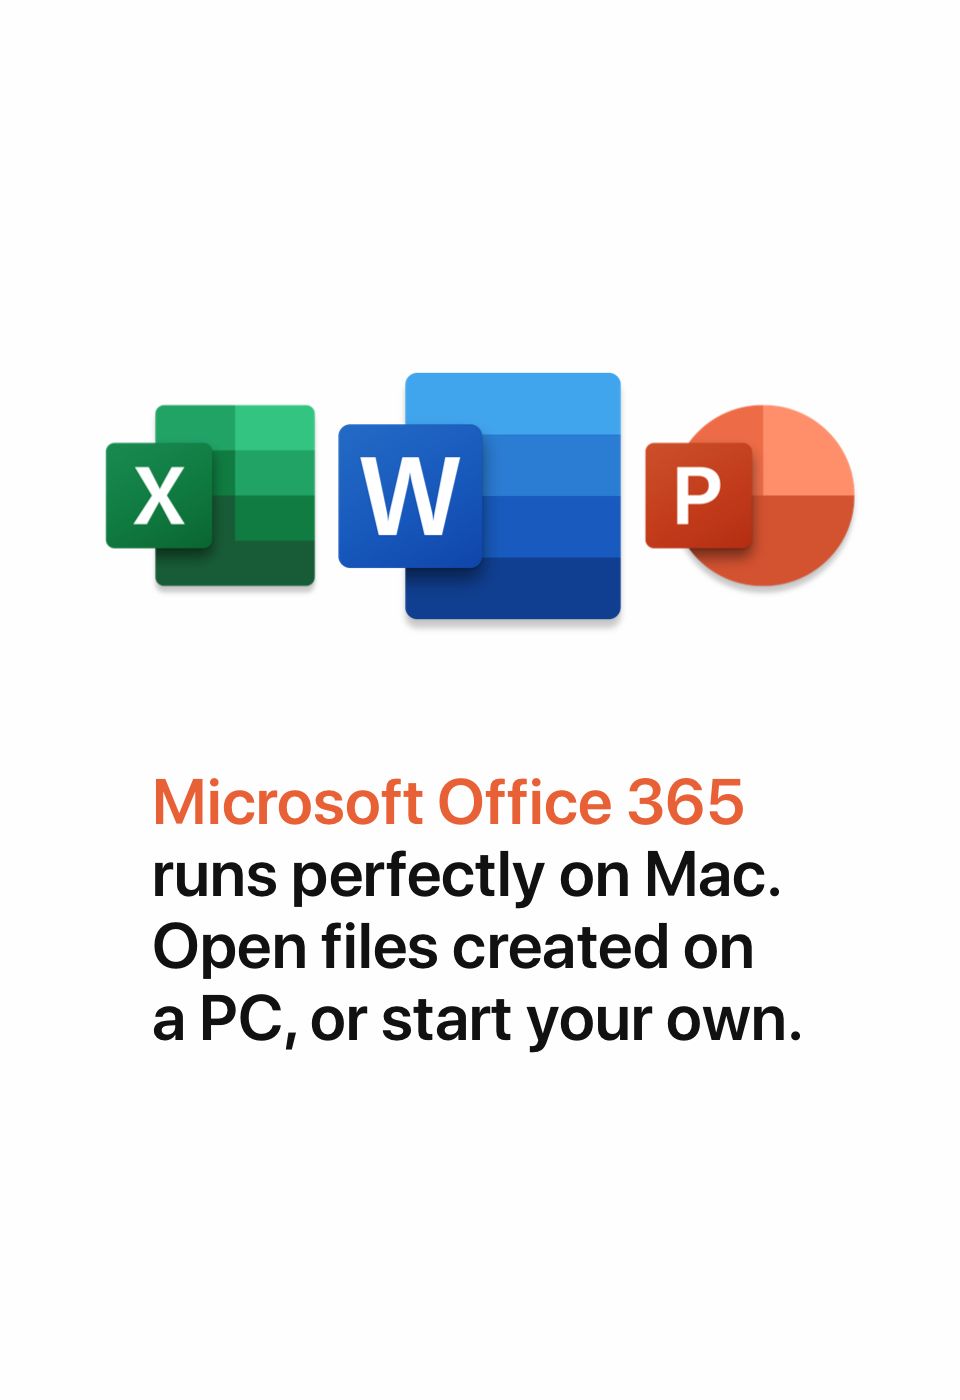 Microsoft Office 365 runs perfectly on Mac. Open files created on a PC, or start your own.